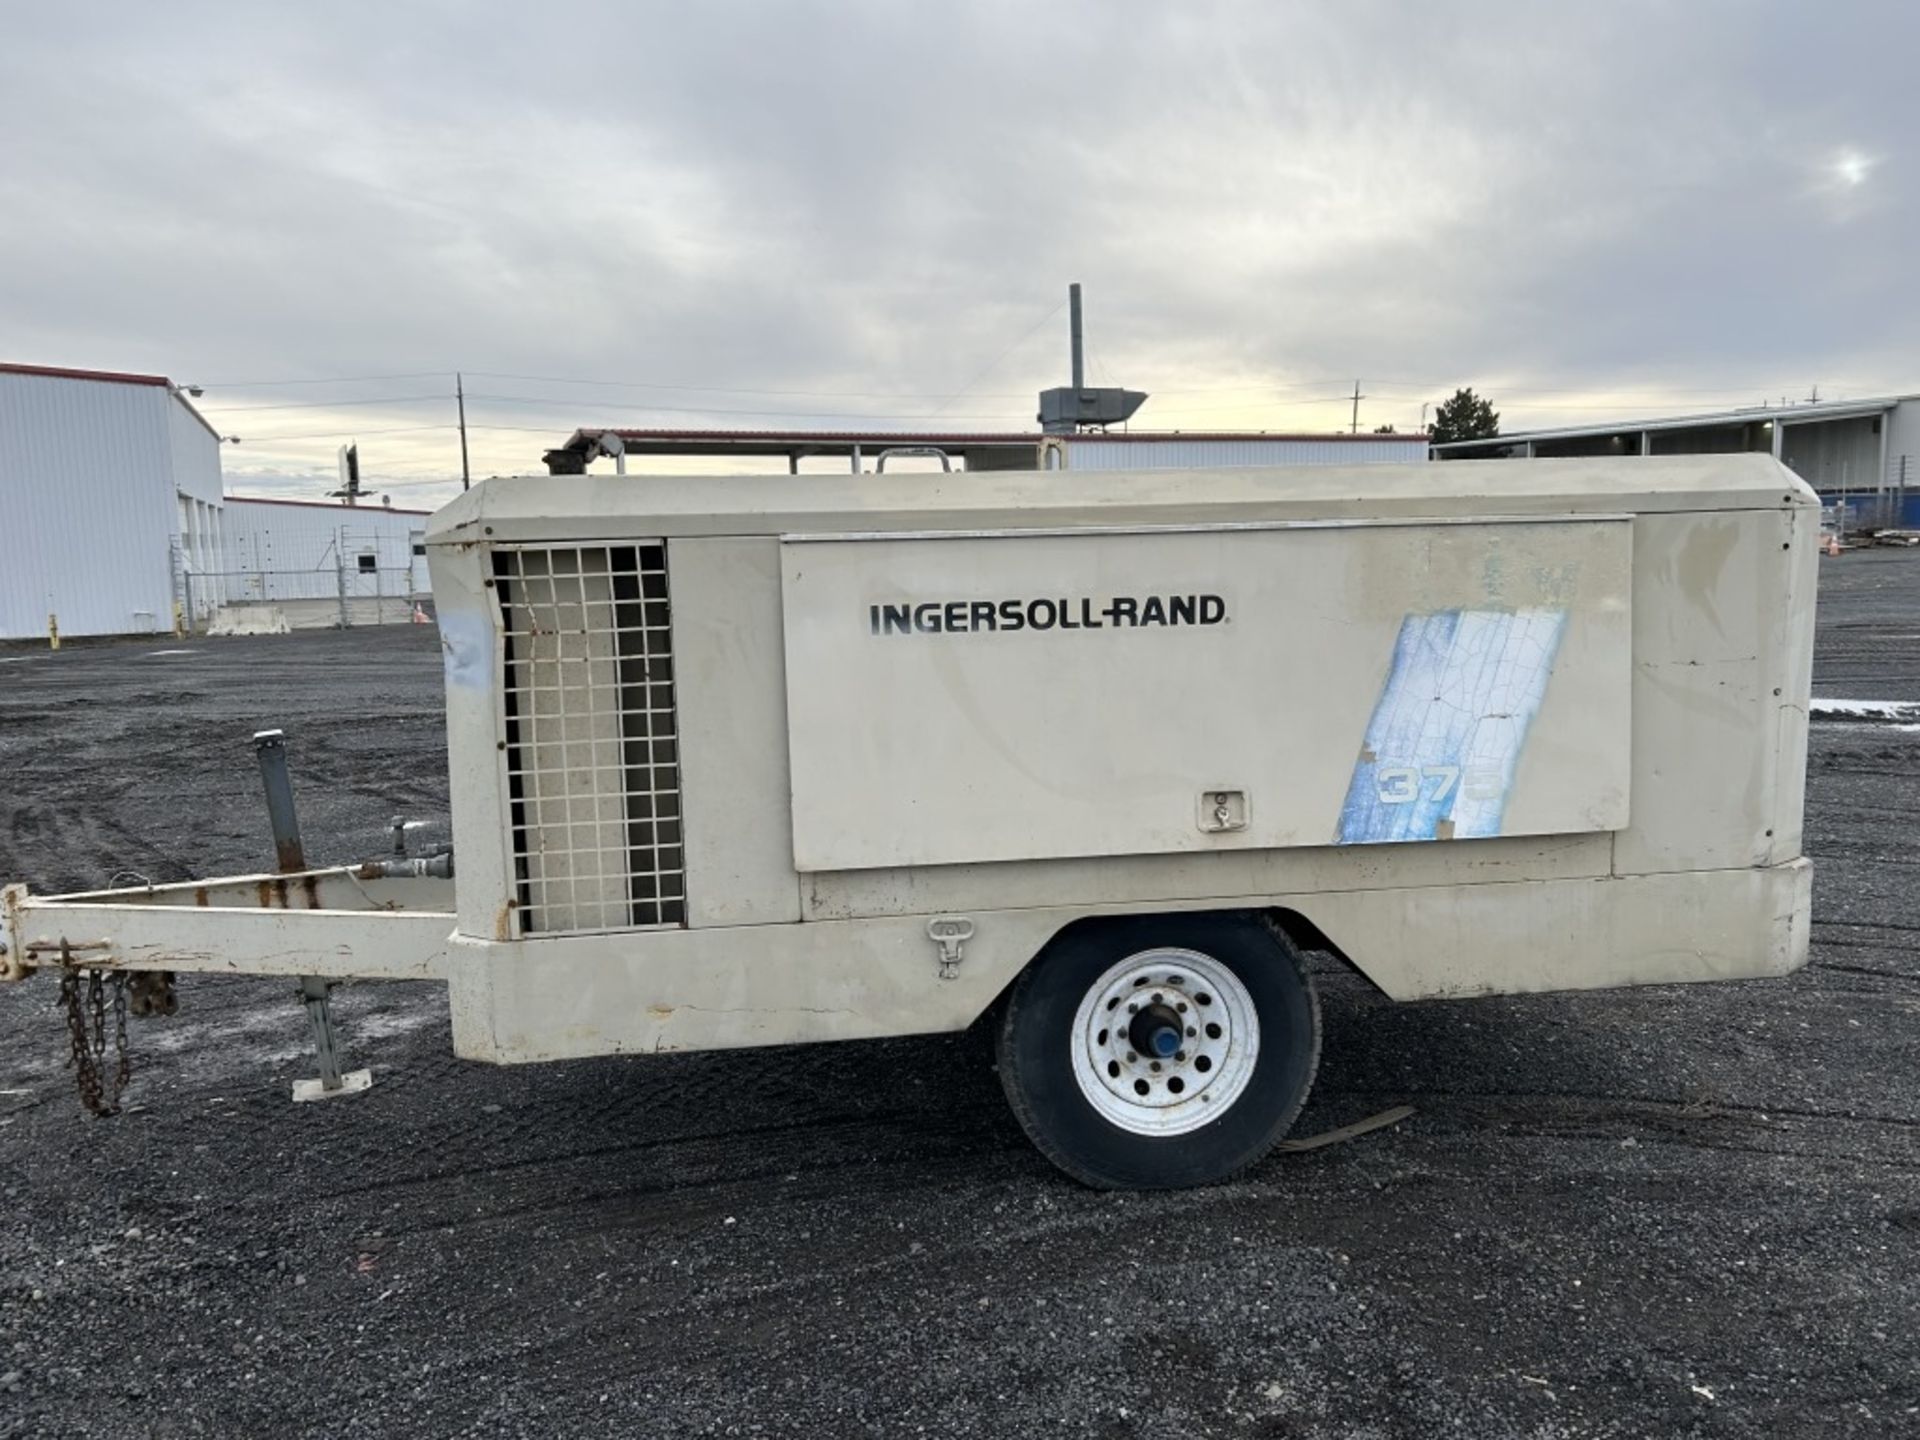 1989 Ingersoll-Rand 375 Towable Air Compressor - Image 2 of 27